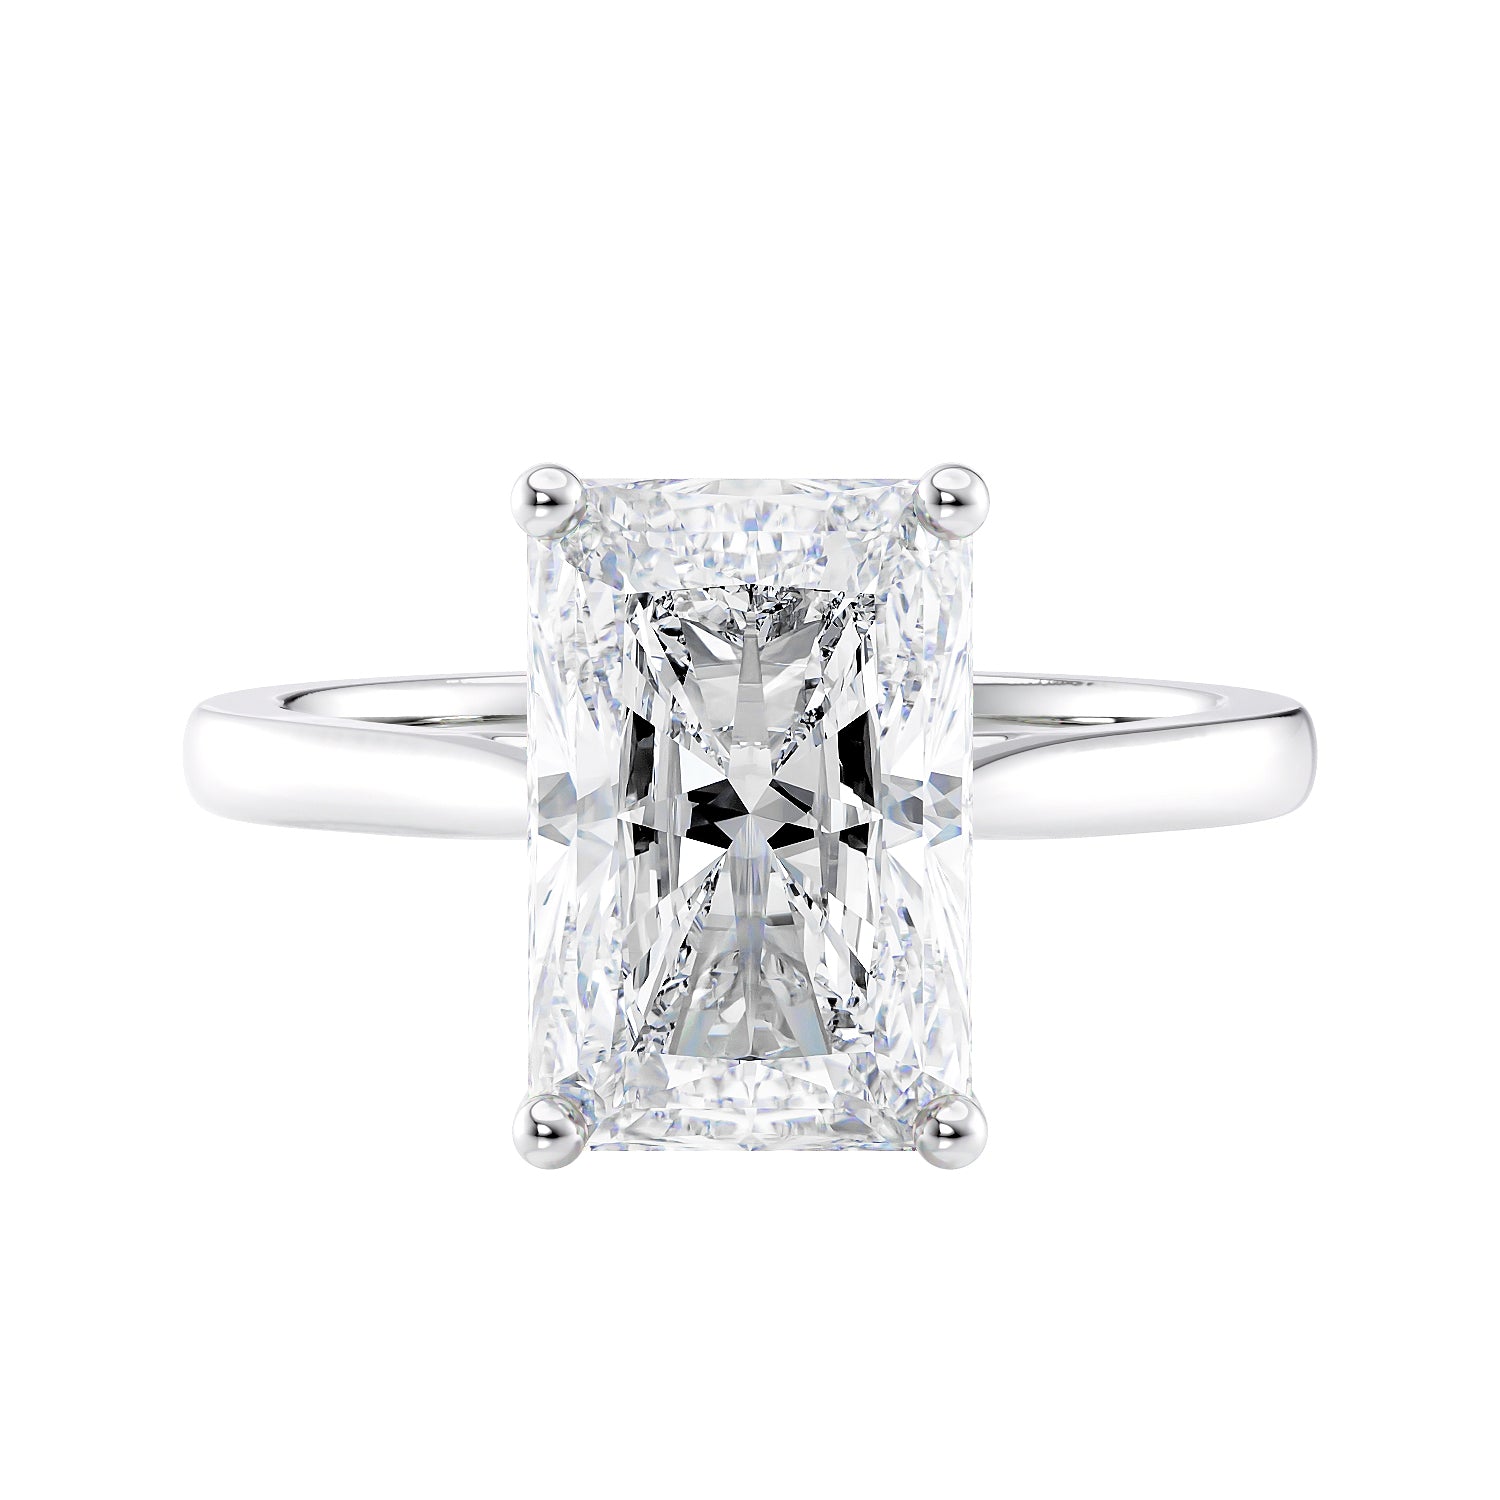 Natural diamond radiant cut engagement ring white gold front view.